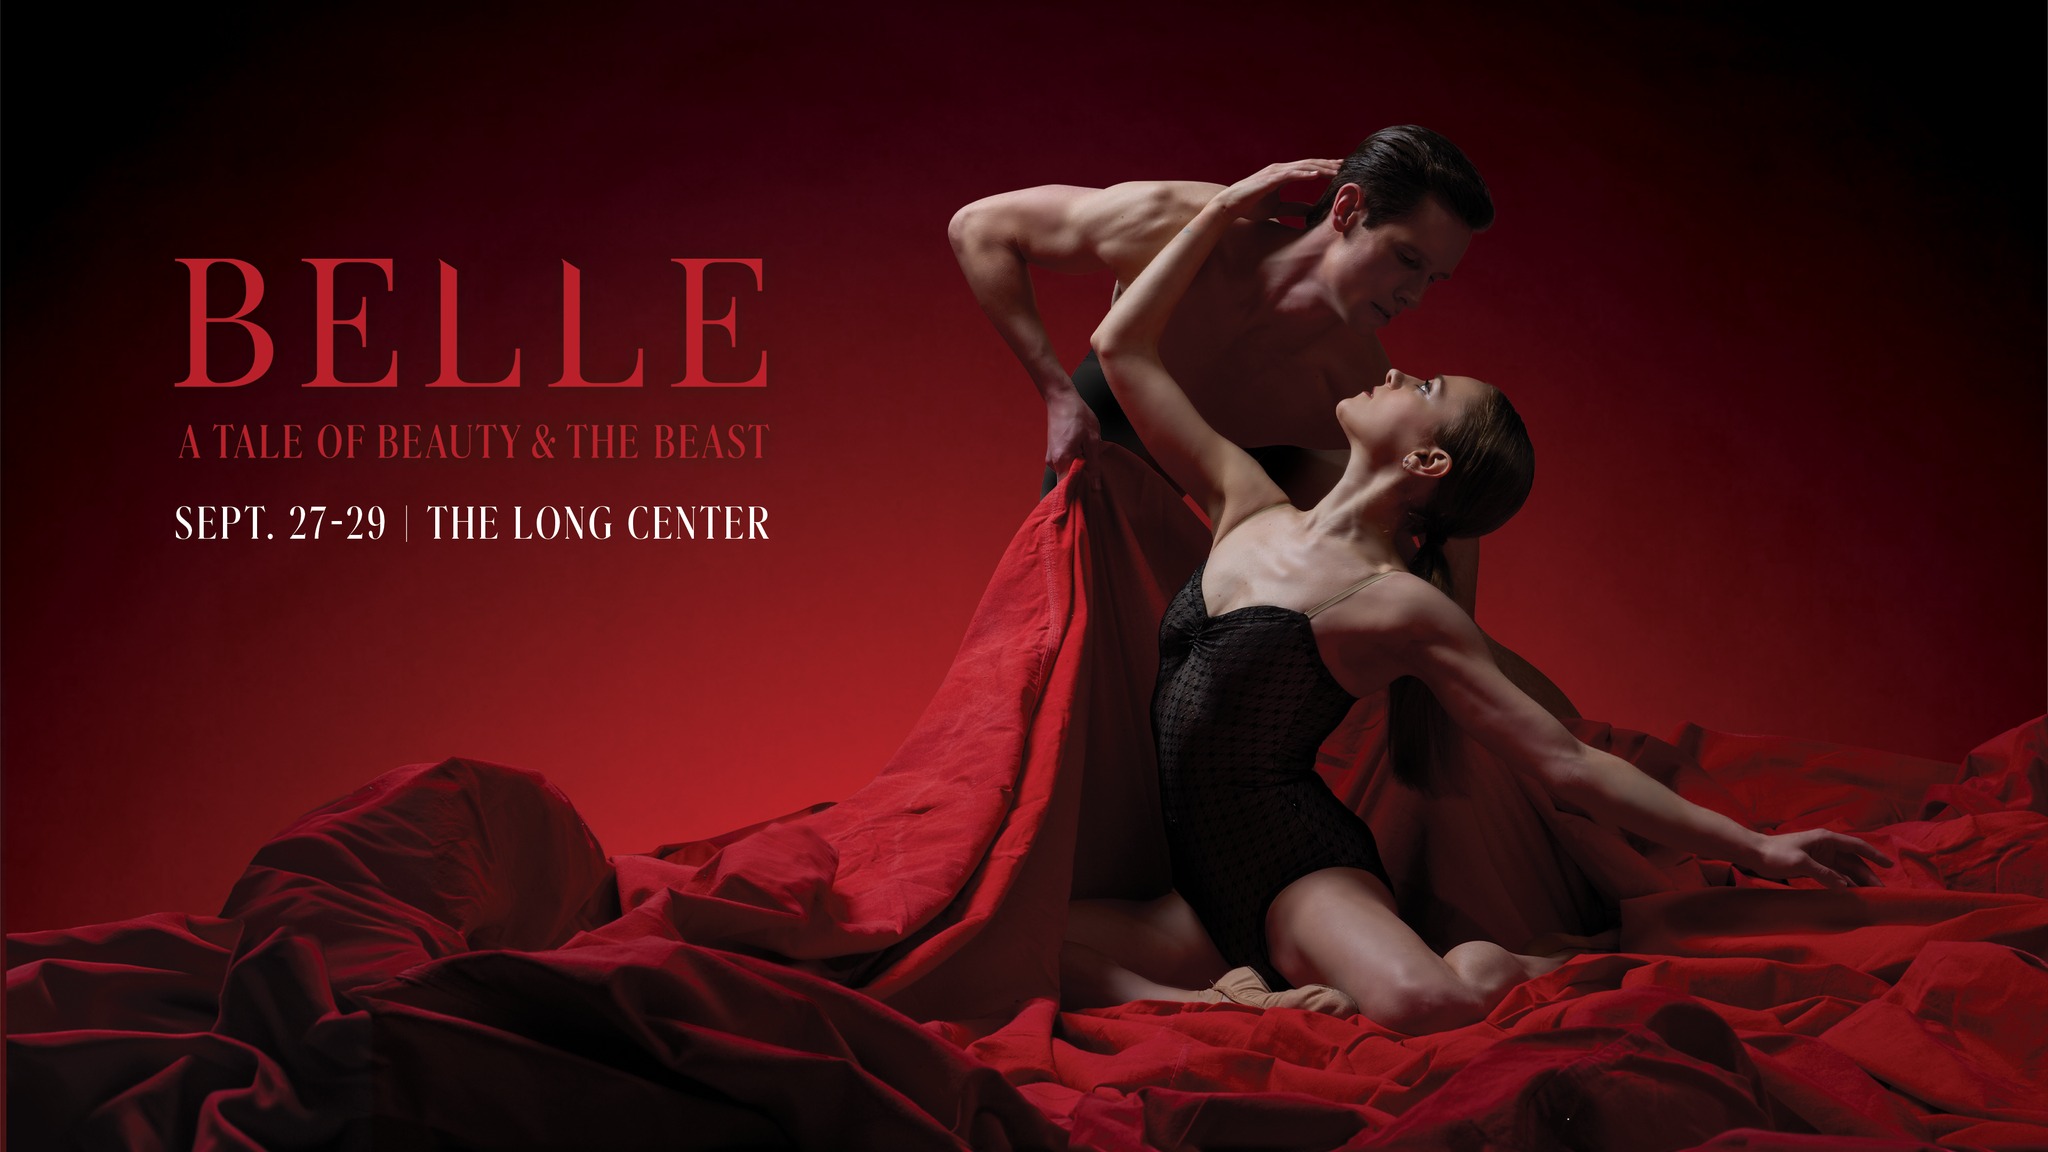 Belle - A Tale of Beauty and the Beast by Ballet Austin